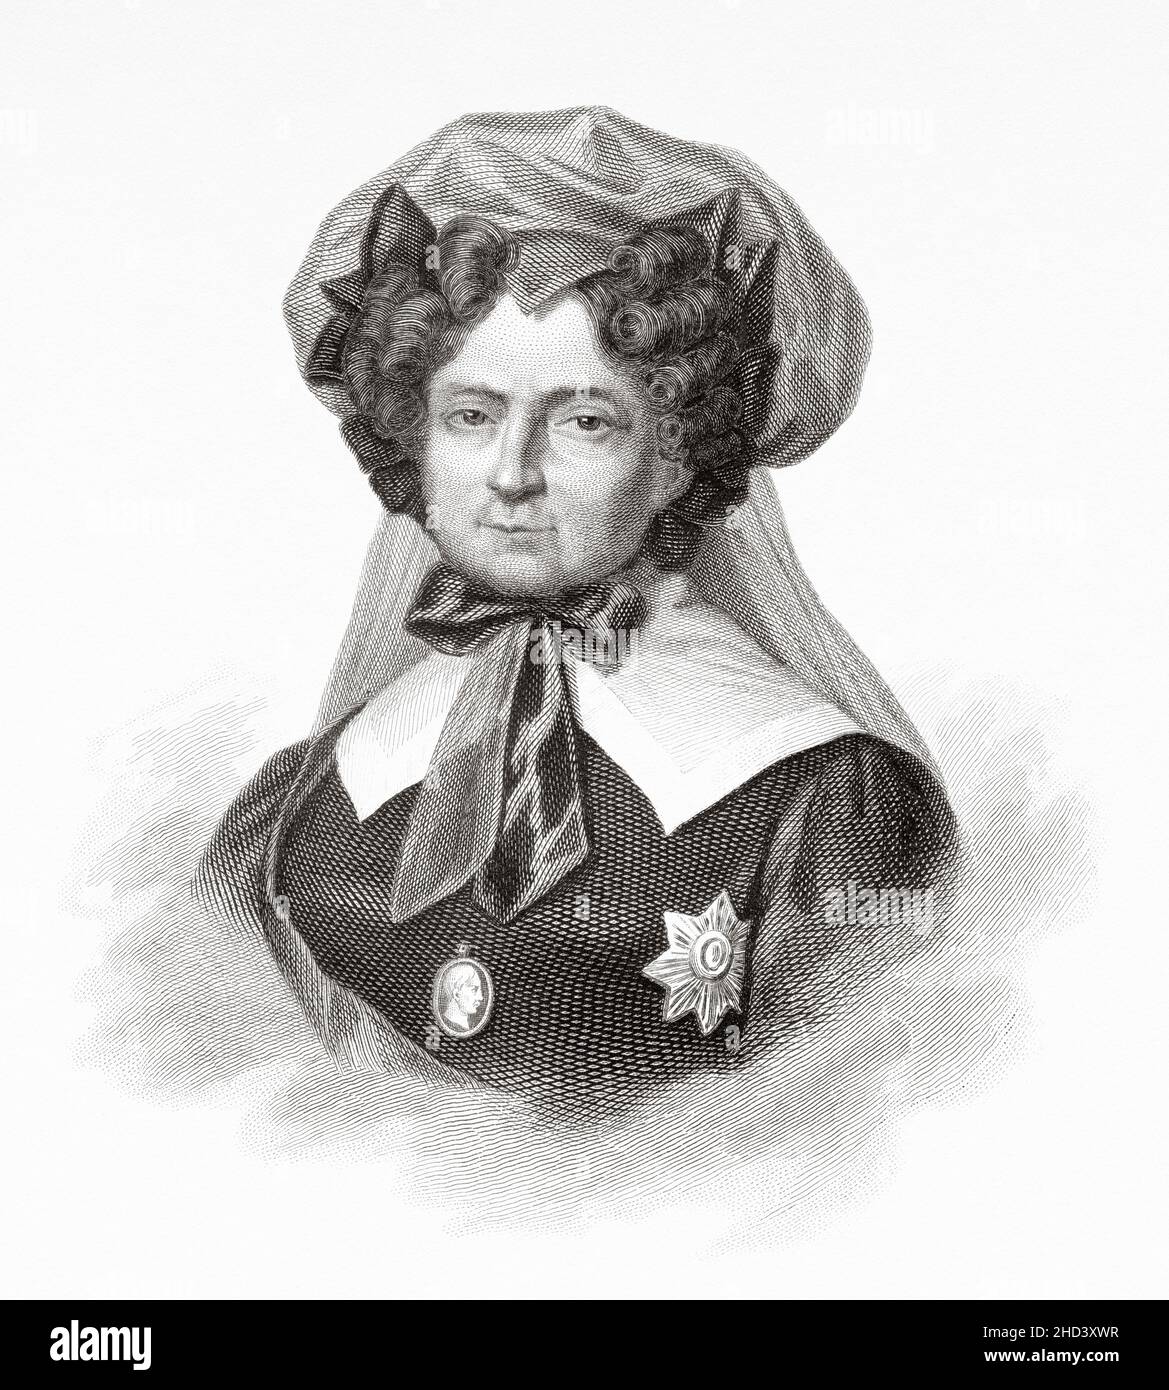 Maria Feodorovna. Duchess Sophie Dorothea of Württemberg (1759-1828) became Empress consort of Russia as the second wife of Emperor Paul I. She founded the Office of the Institutions of Empress Maria. Daughter of Duke Frederick Eugene of Württemberg and Princess Friederike of Brandenburg-Schwedt, Sophie Dorothea belonged to a junior branch of the House of Württemberg. Europe. Old 19th century engraved illustration from Portraits et histoire des hommes utile by Societe Montyon et Franklin 1837 Stock Photo